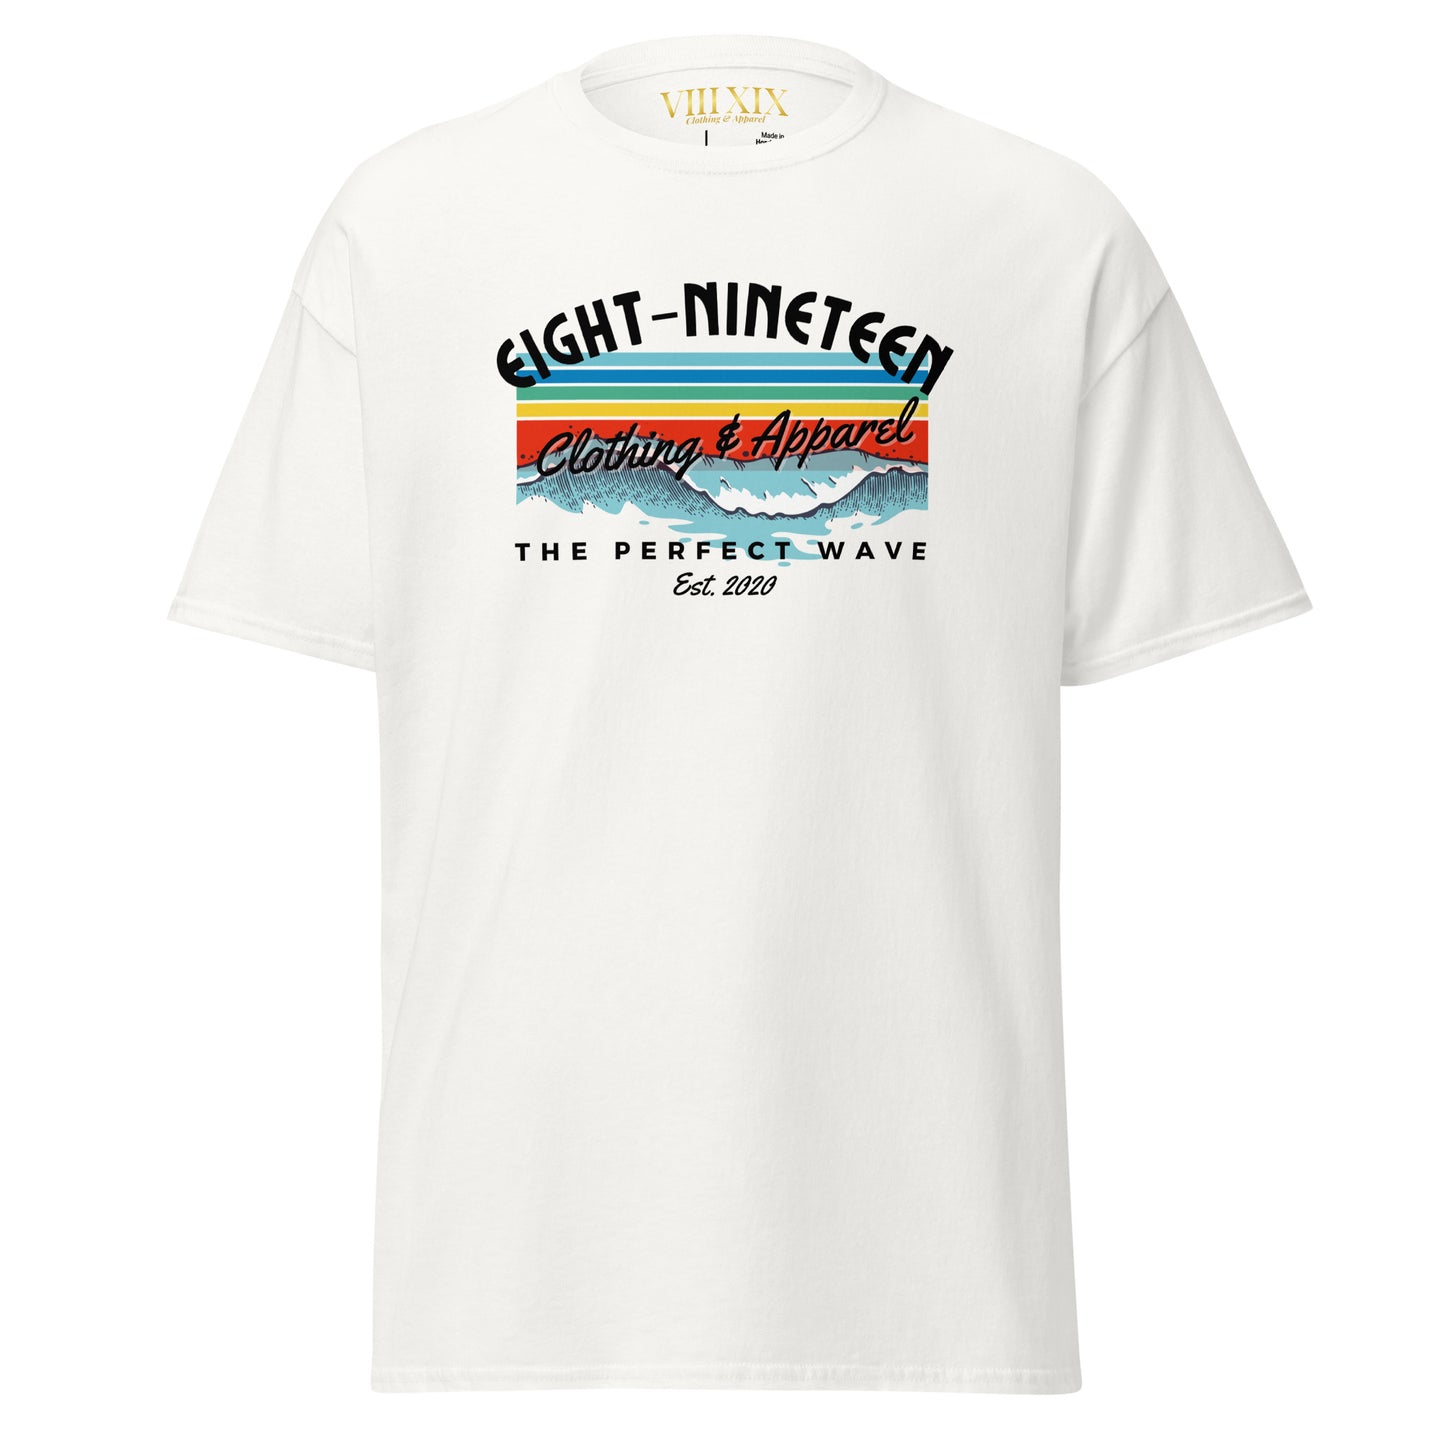 The Perfect Wave T-Shirt